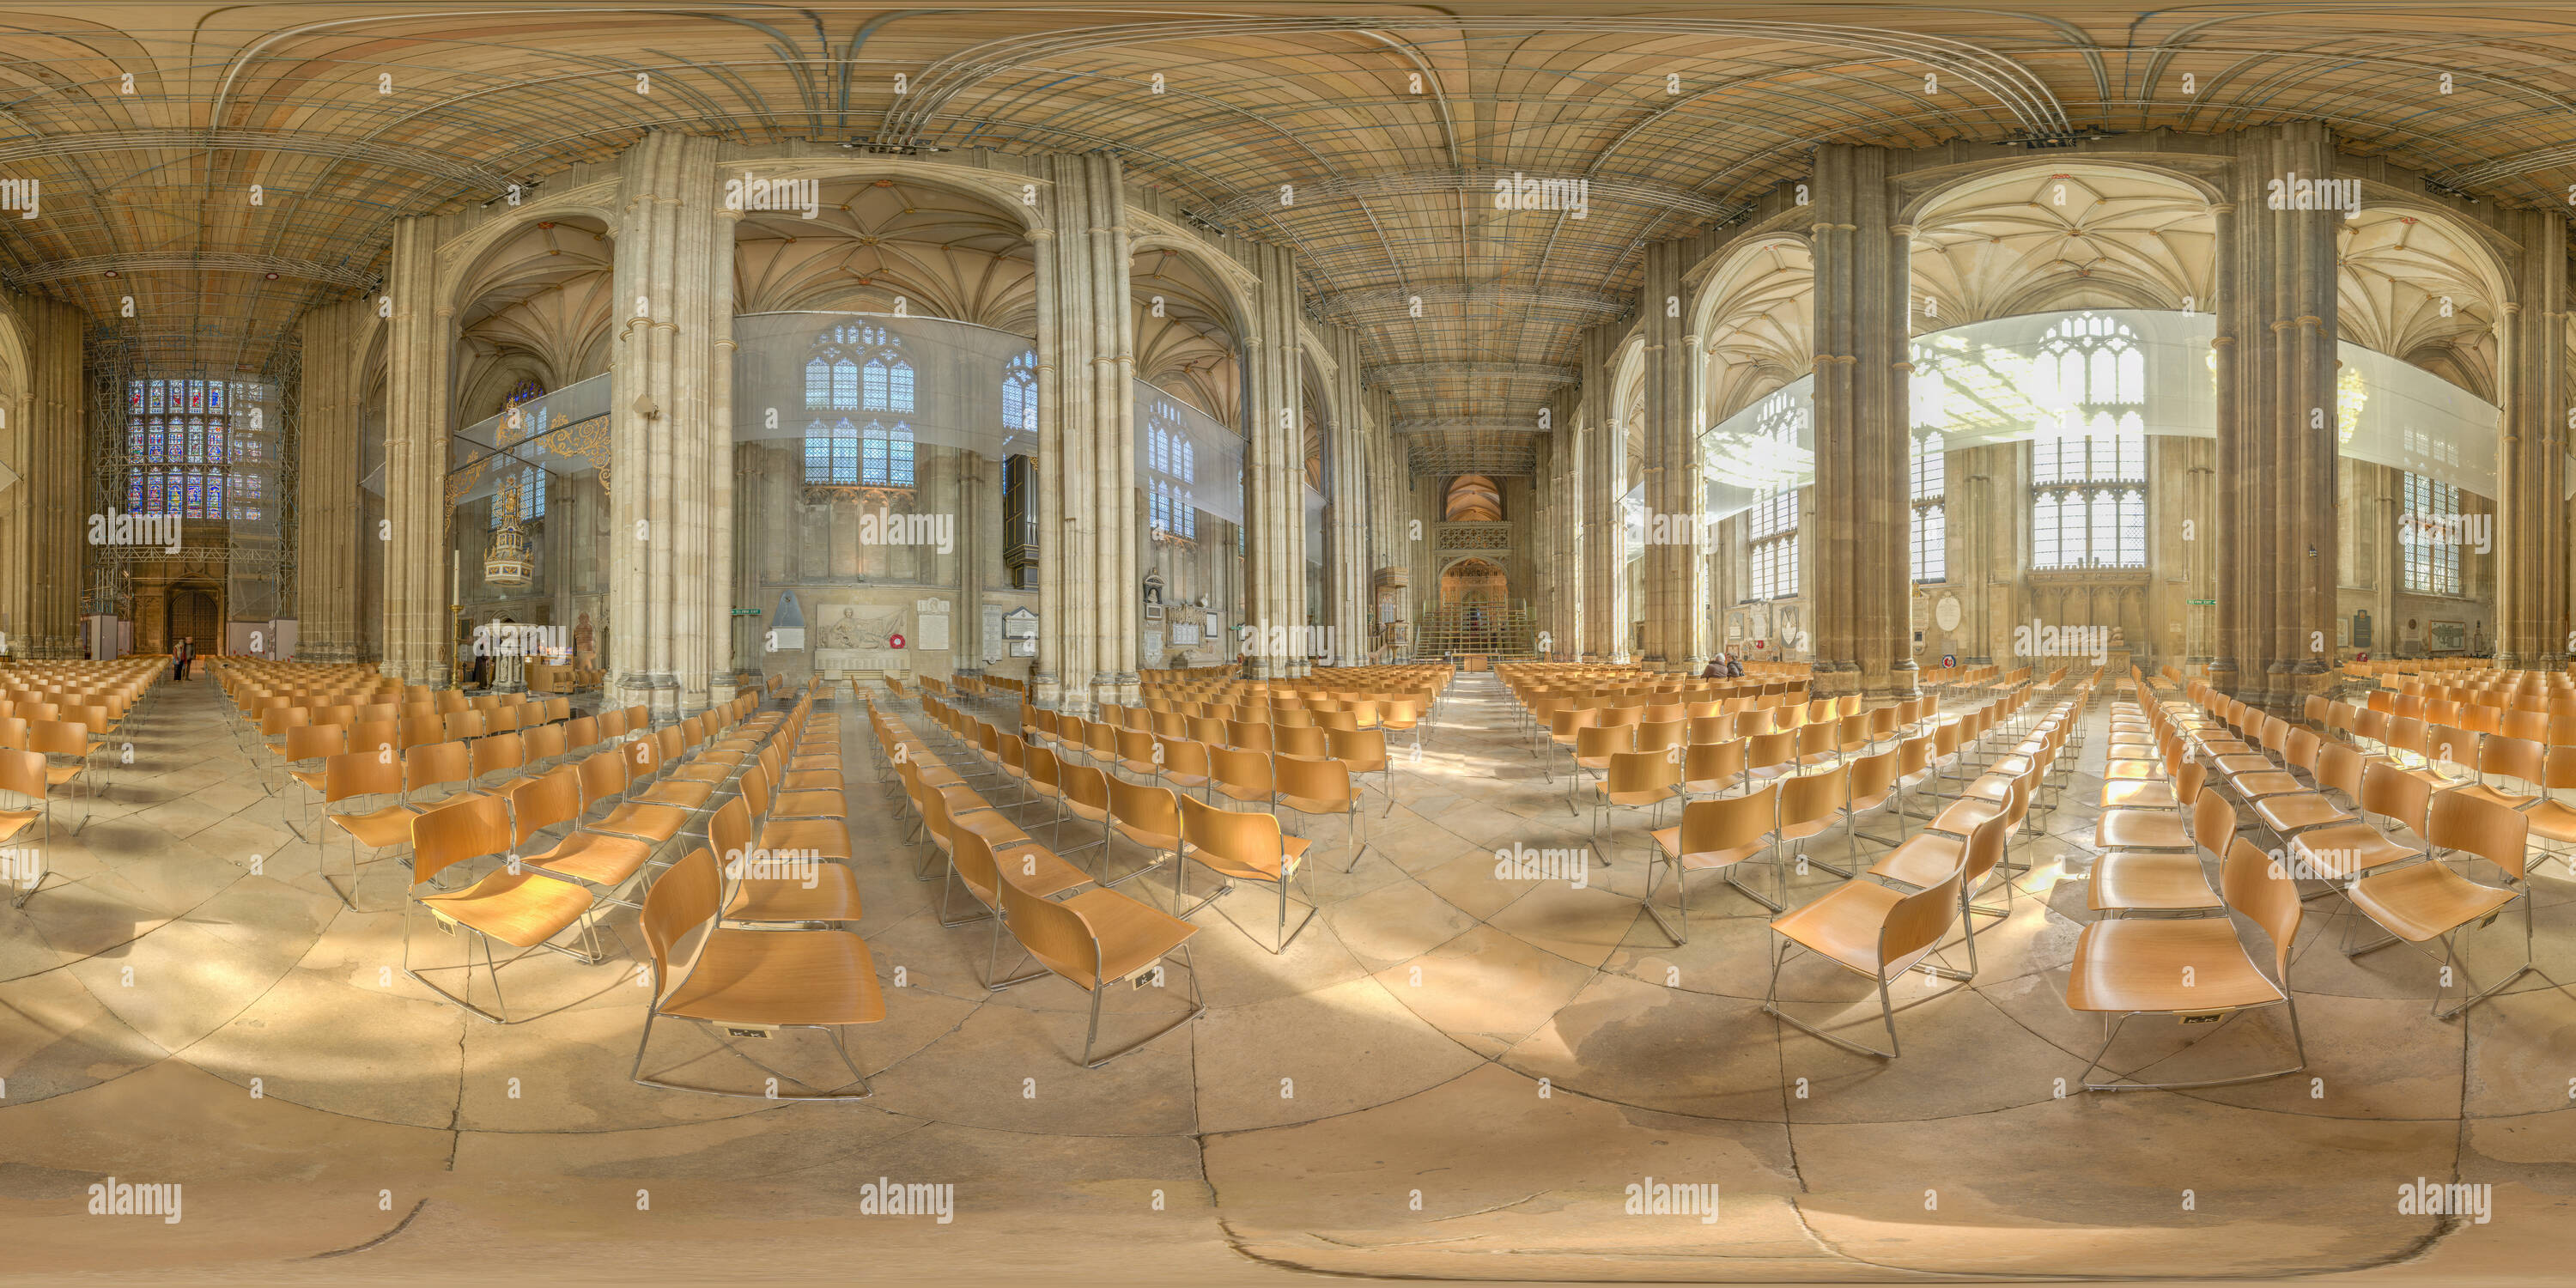 360 degree panoramic view of Nave at the world heritage site of Canterbury cathedral, England.